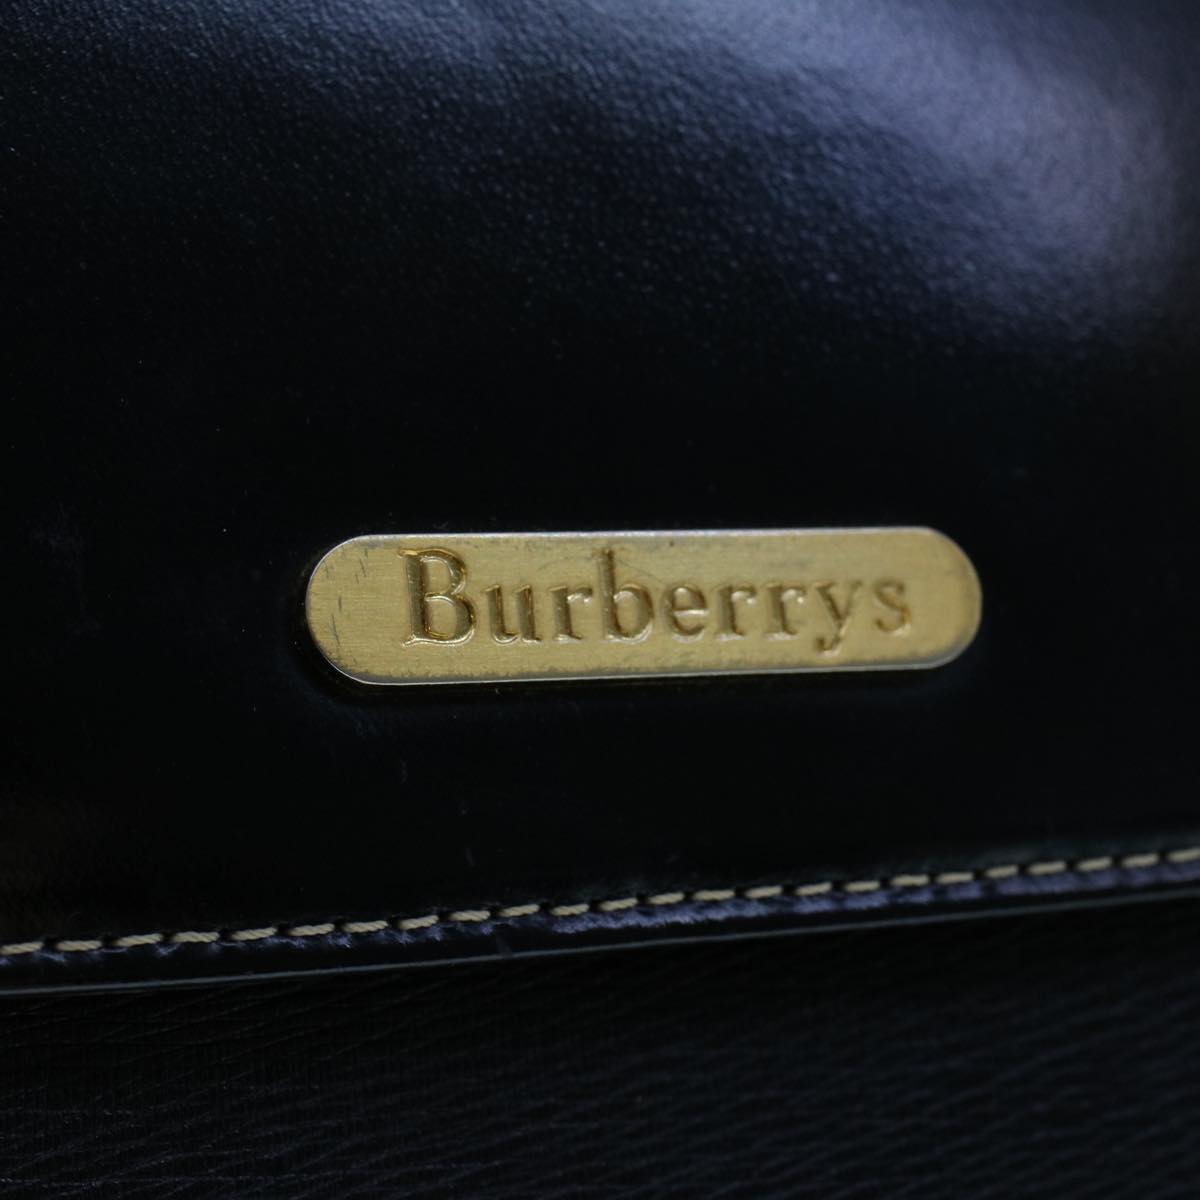 Burberrys Hand Bag Leather Black Auth bs6526